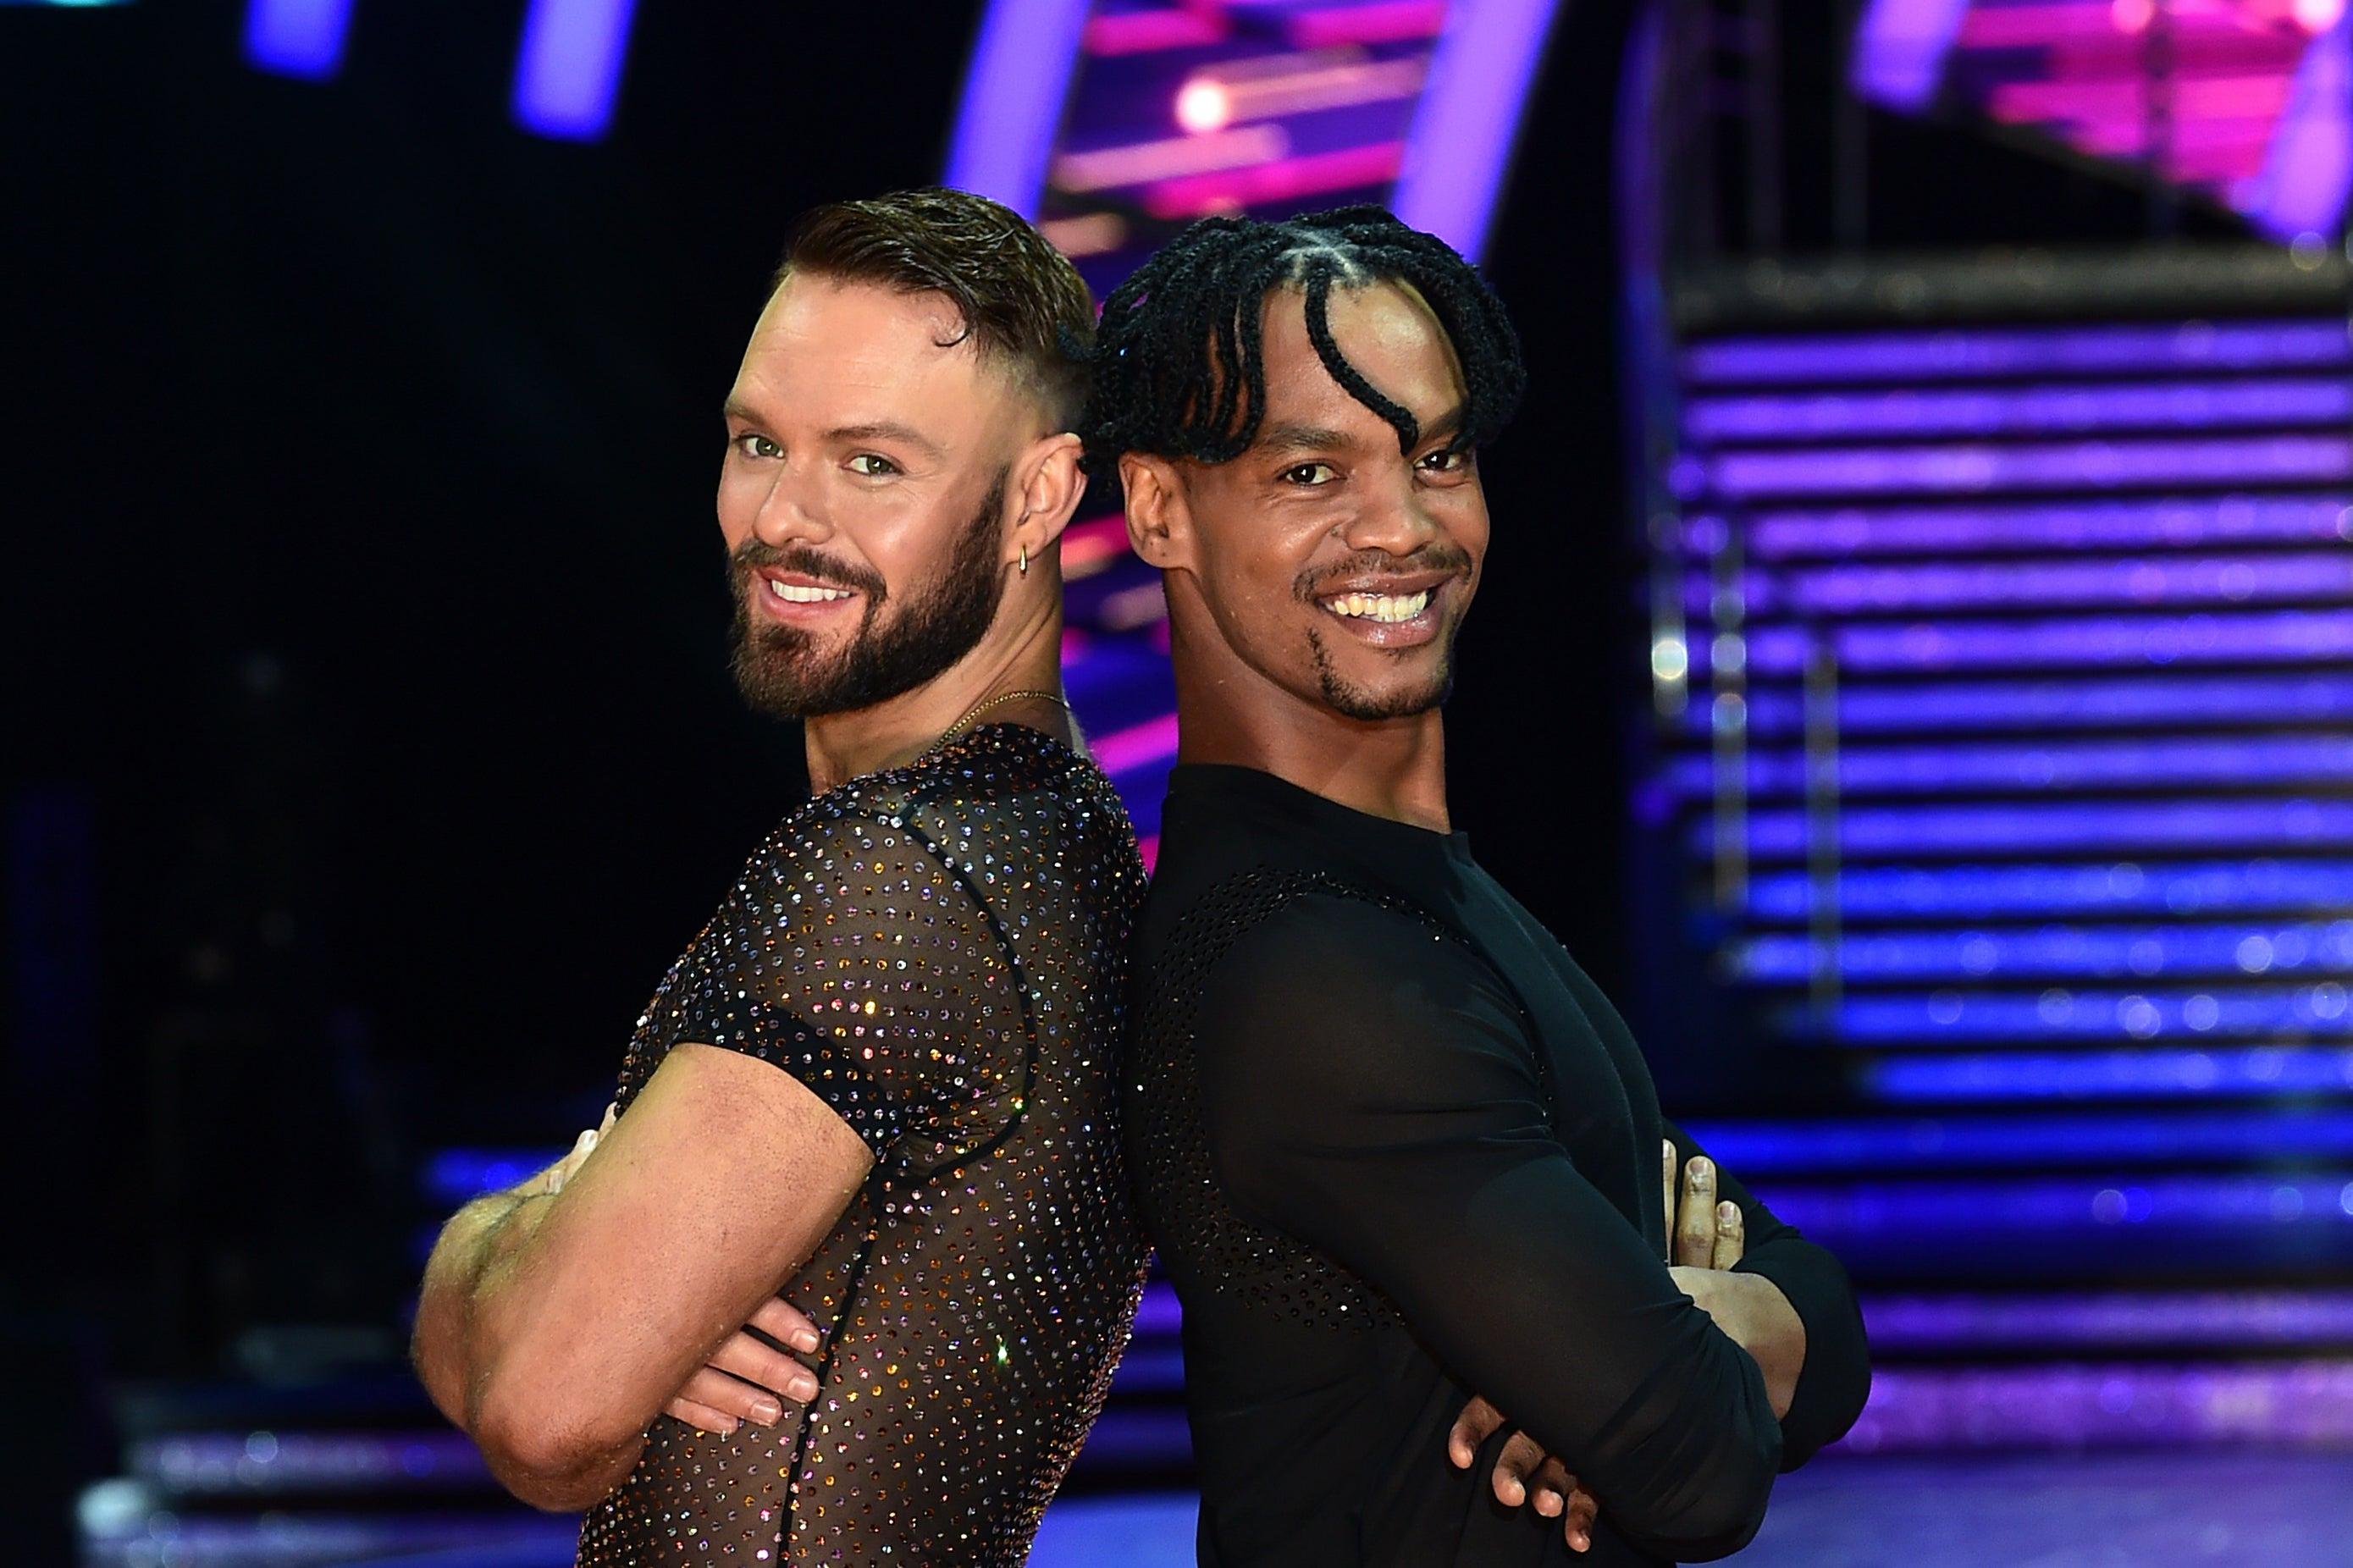 John Whaite and Johannes Radebe on the Strictly tour in 2022